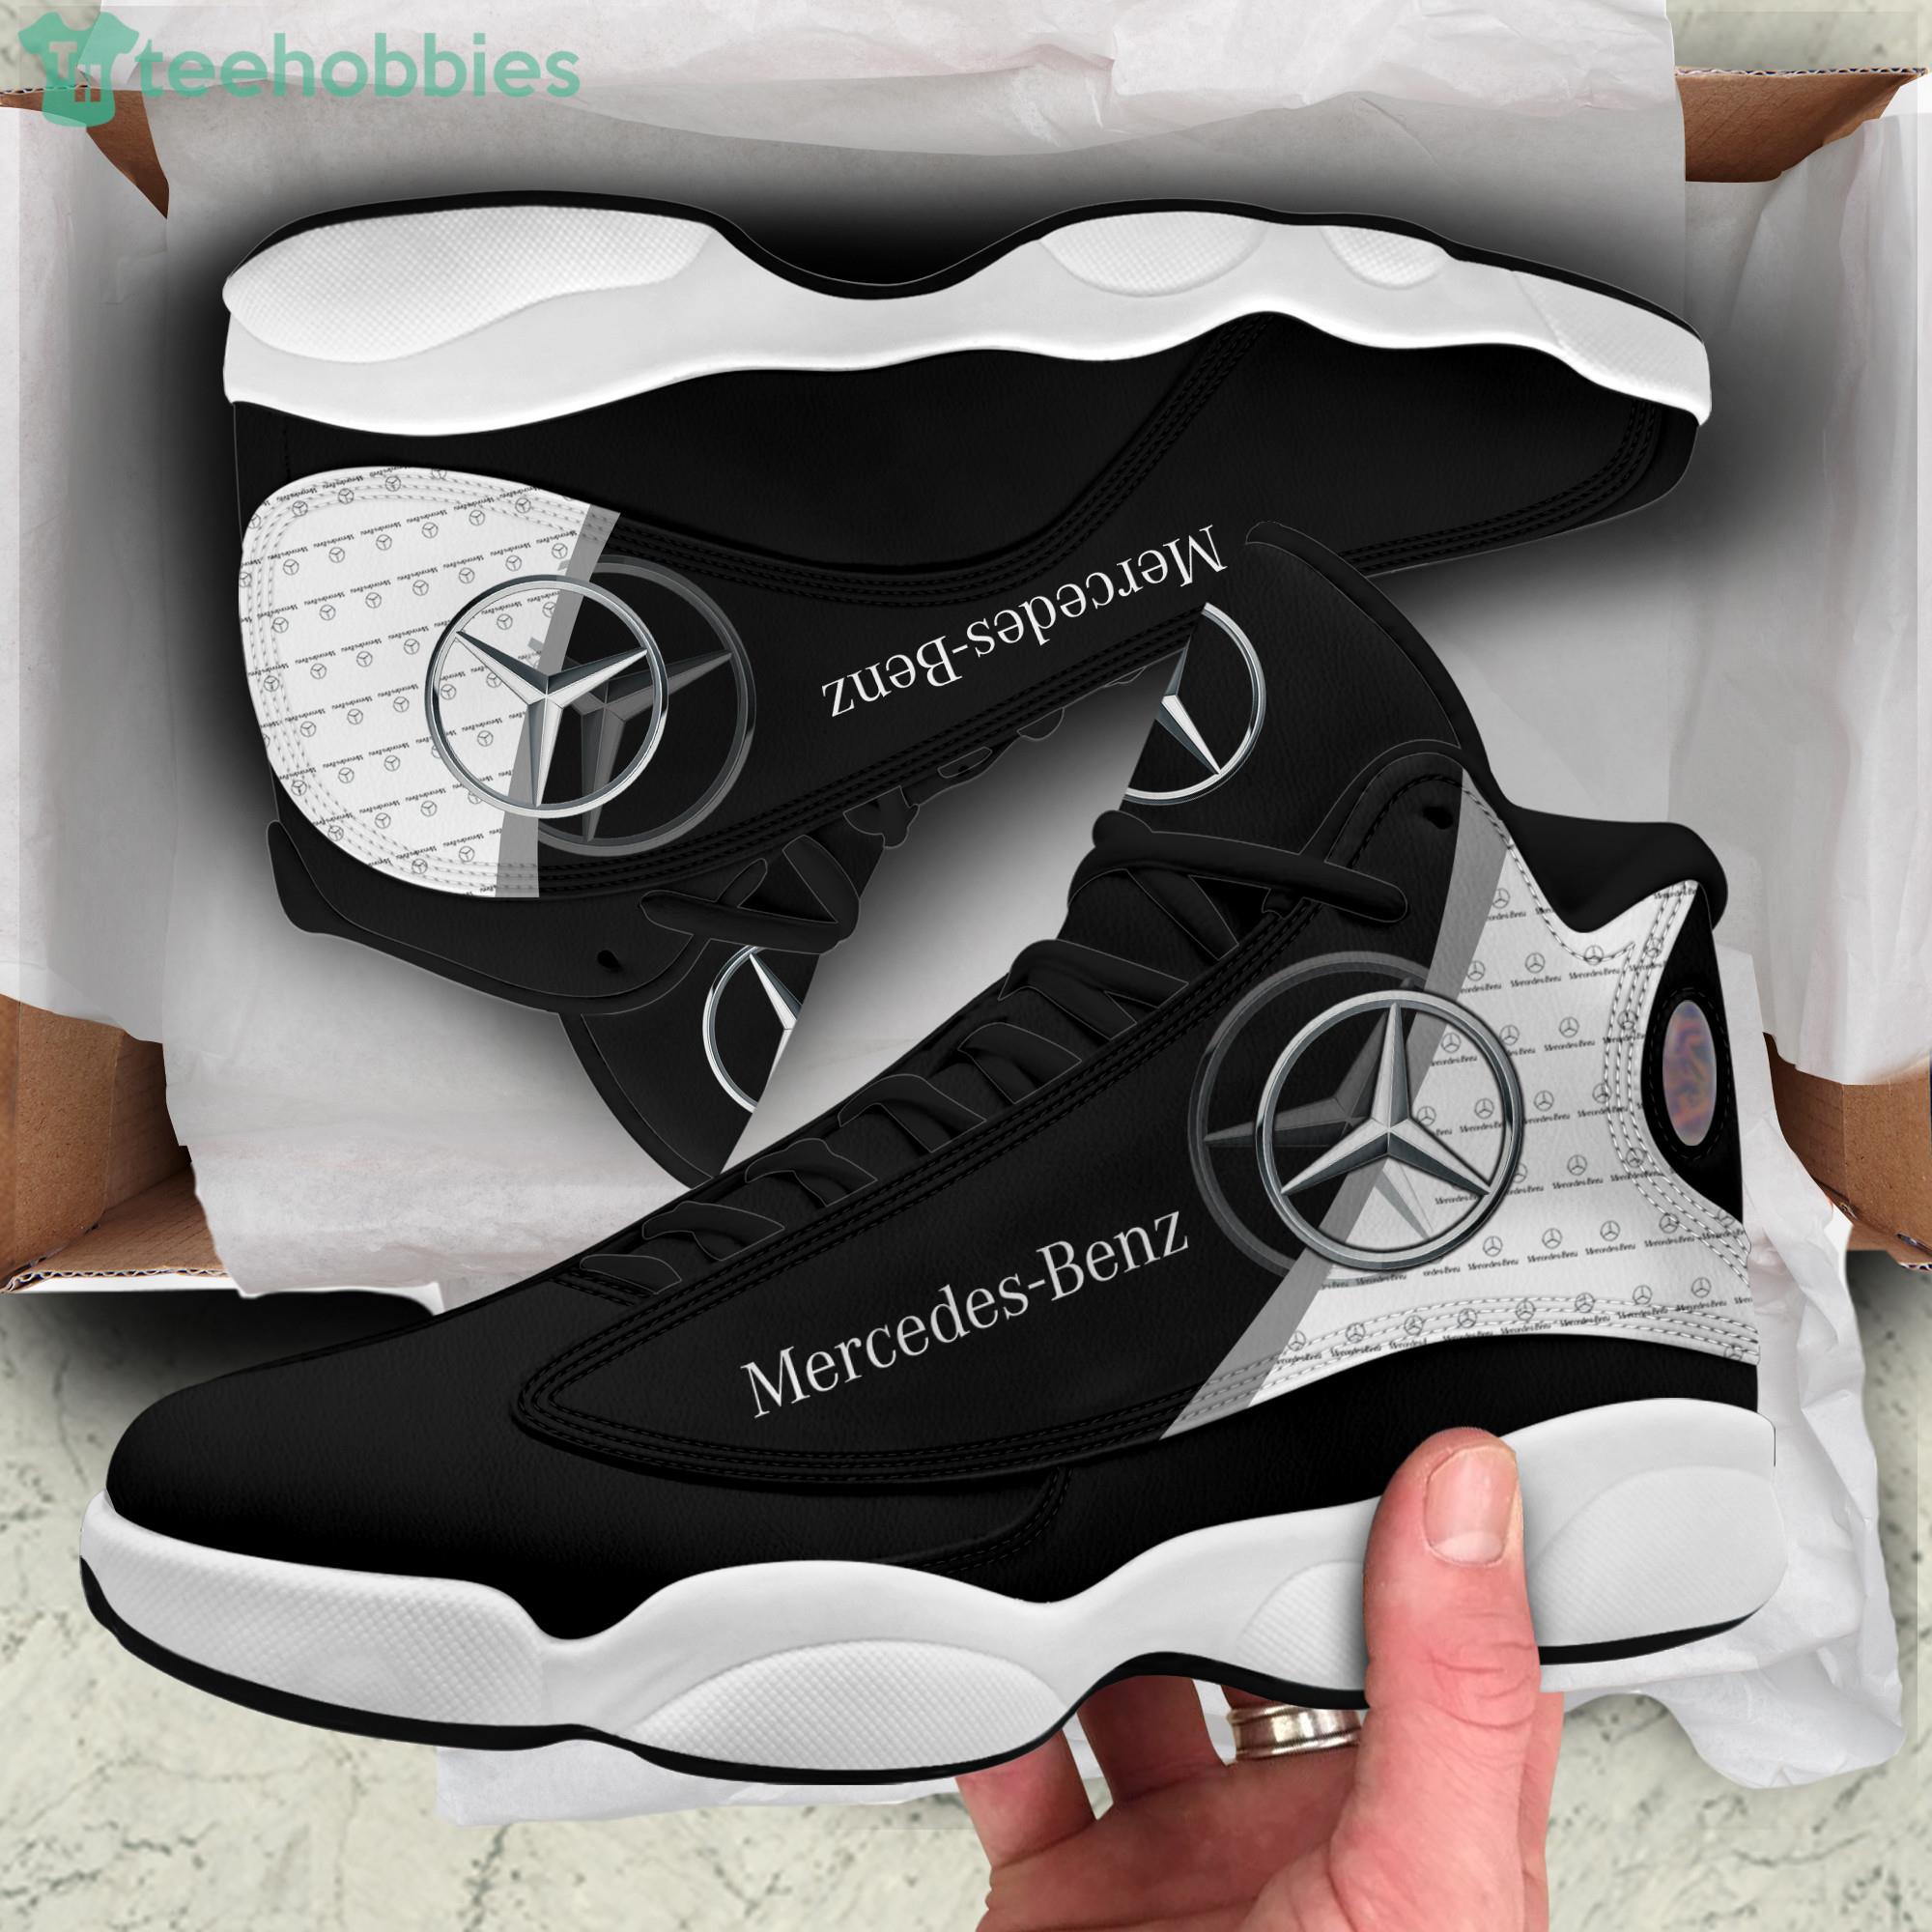 3D All Over Printed Mercedes-Benz Air Jordan 13 Shoes Product Photo 1 Product photo 1